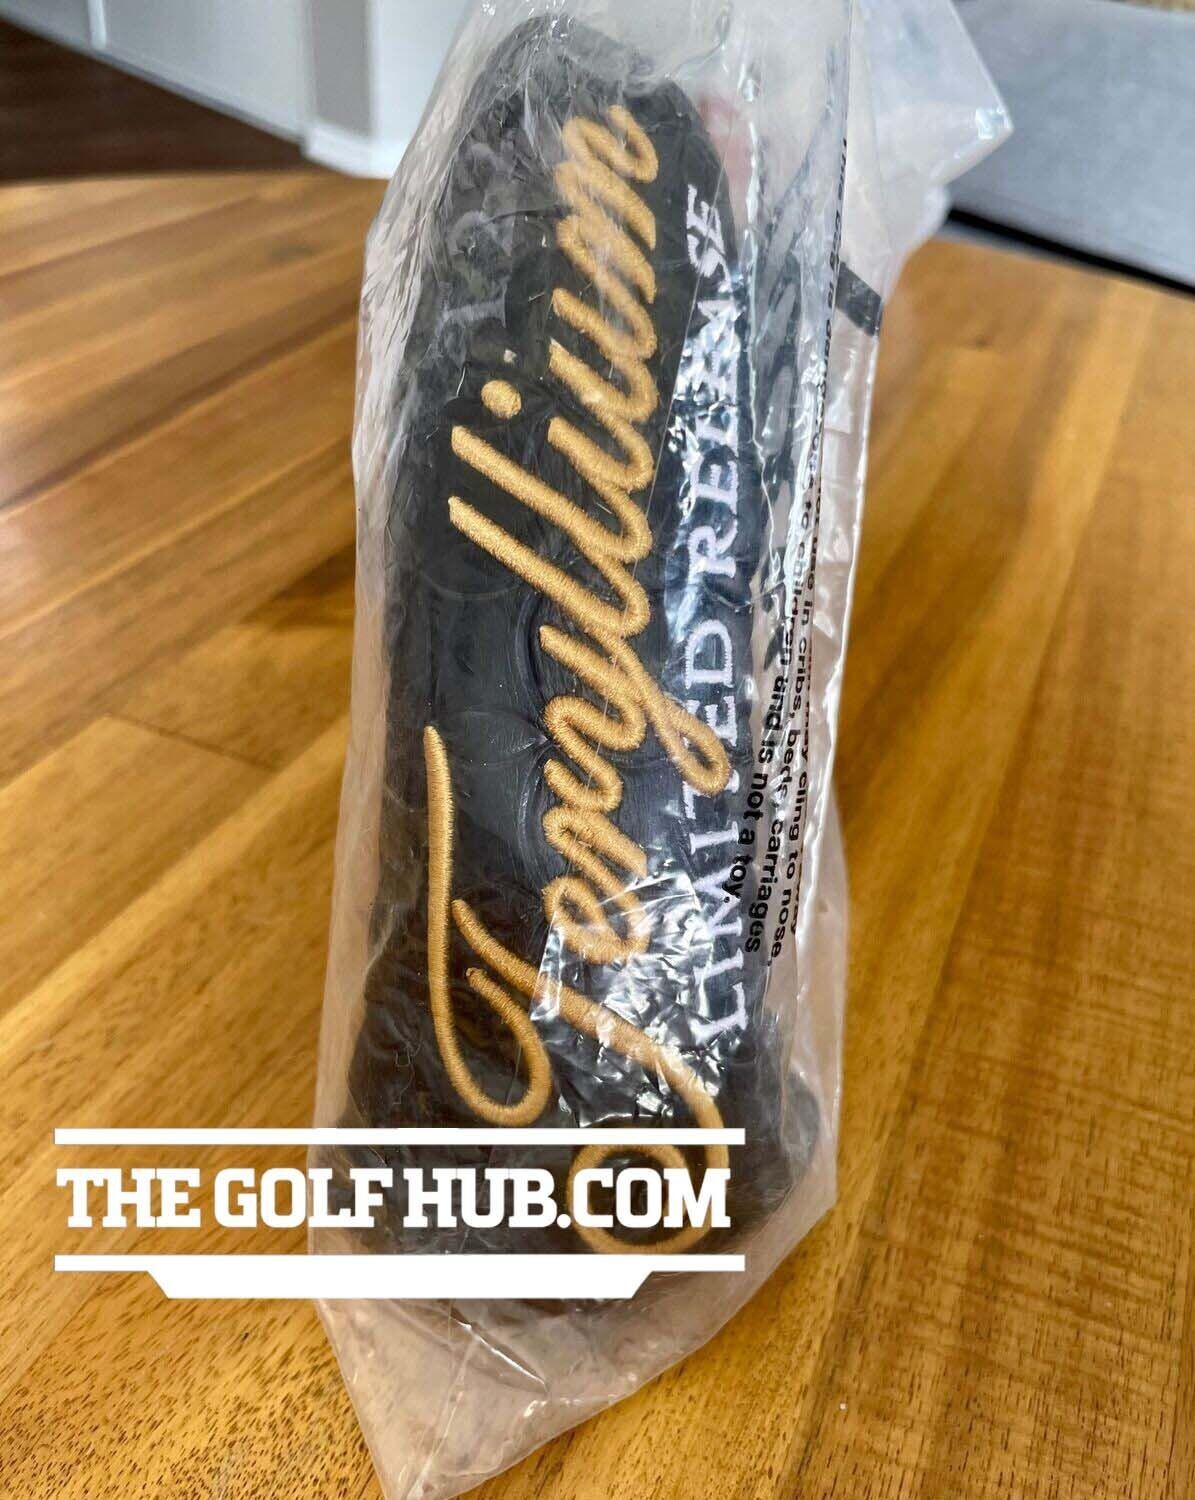 *NEW IN BAG* Scotty Cameron Limited T22 Teryllium Newport 2 35” Putter 🏆✨